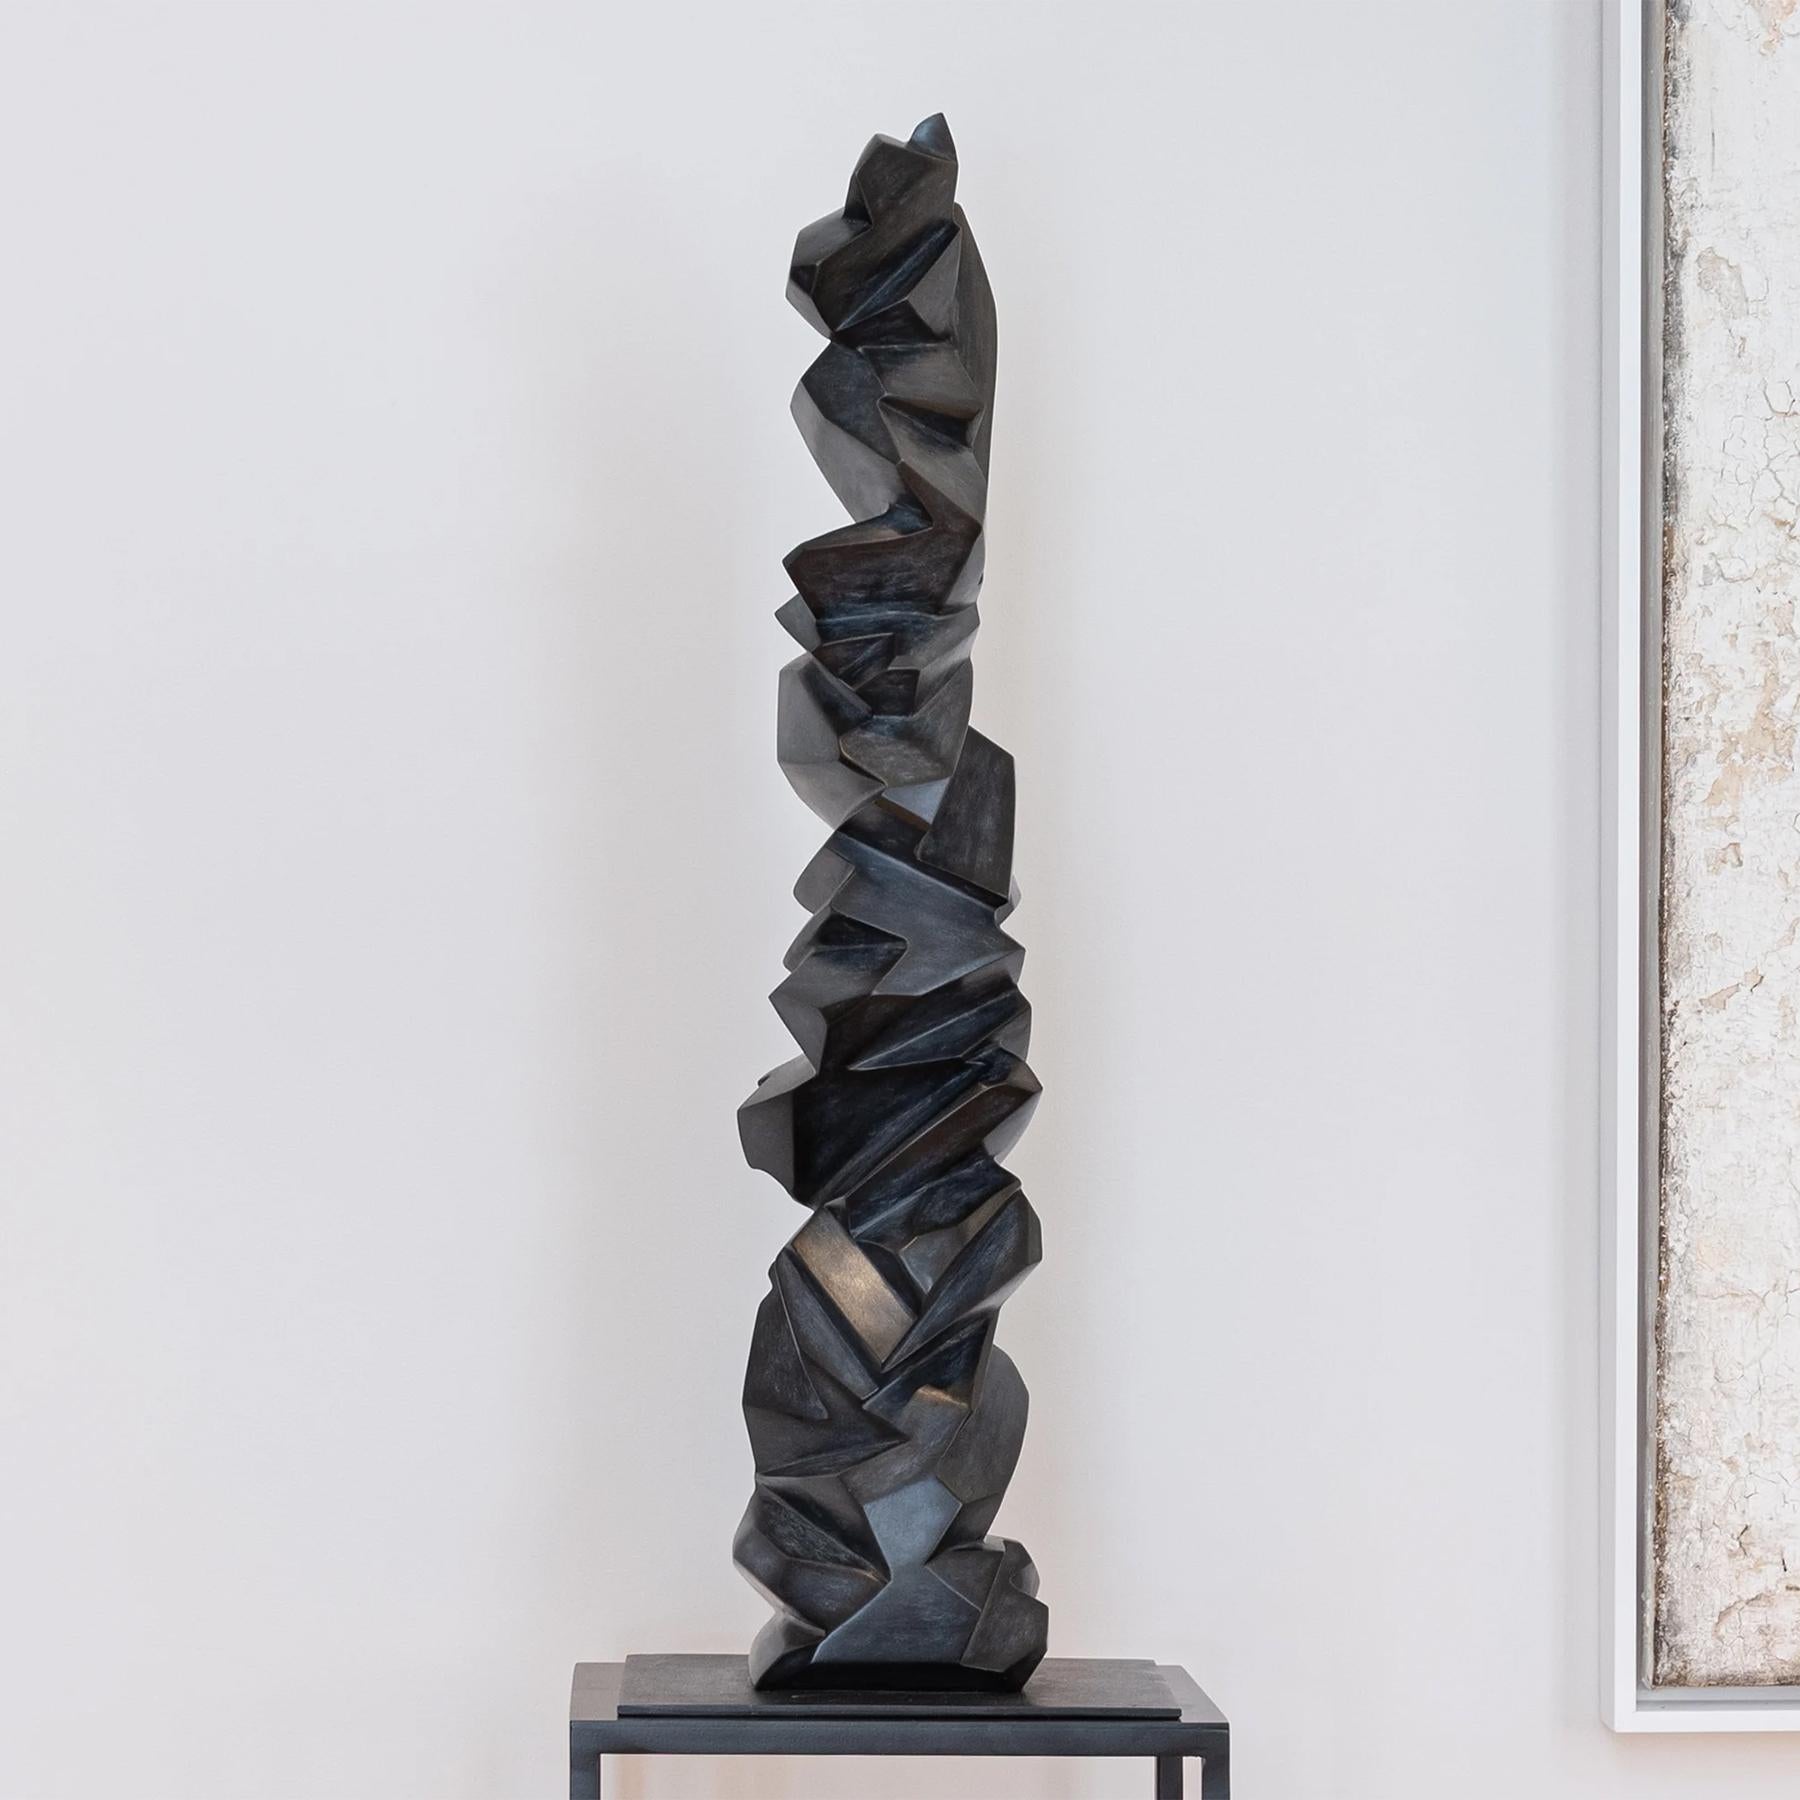 Sculpture Thunder Bronze all in blackened solid bronze.
On bronze base: L 24 x D 24 x H 0,5 cm.